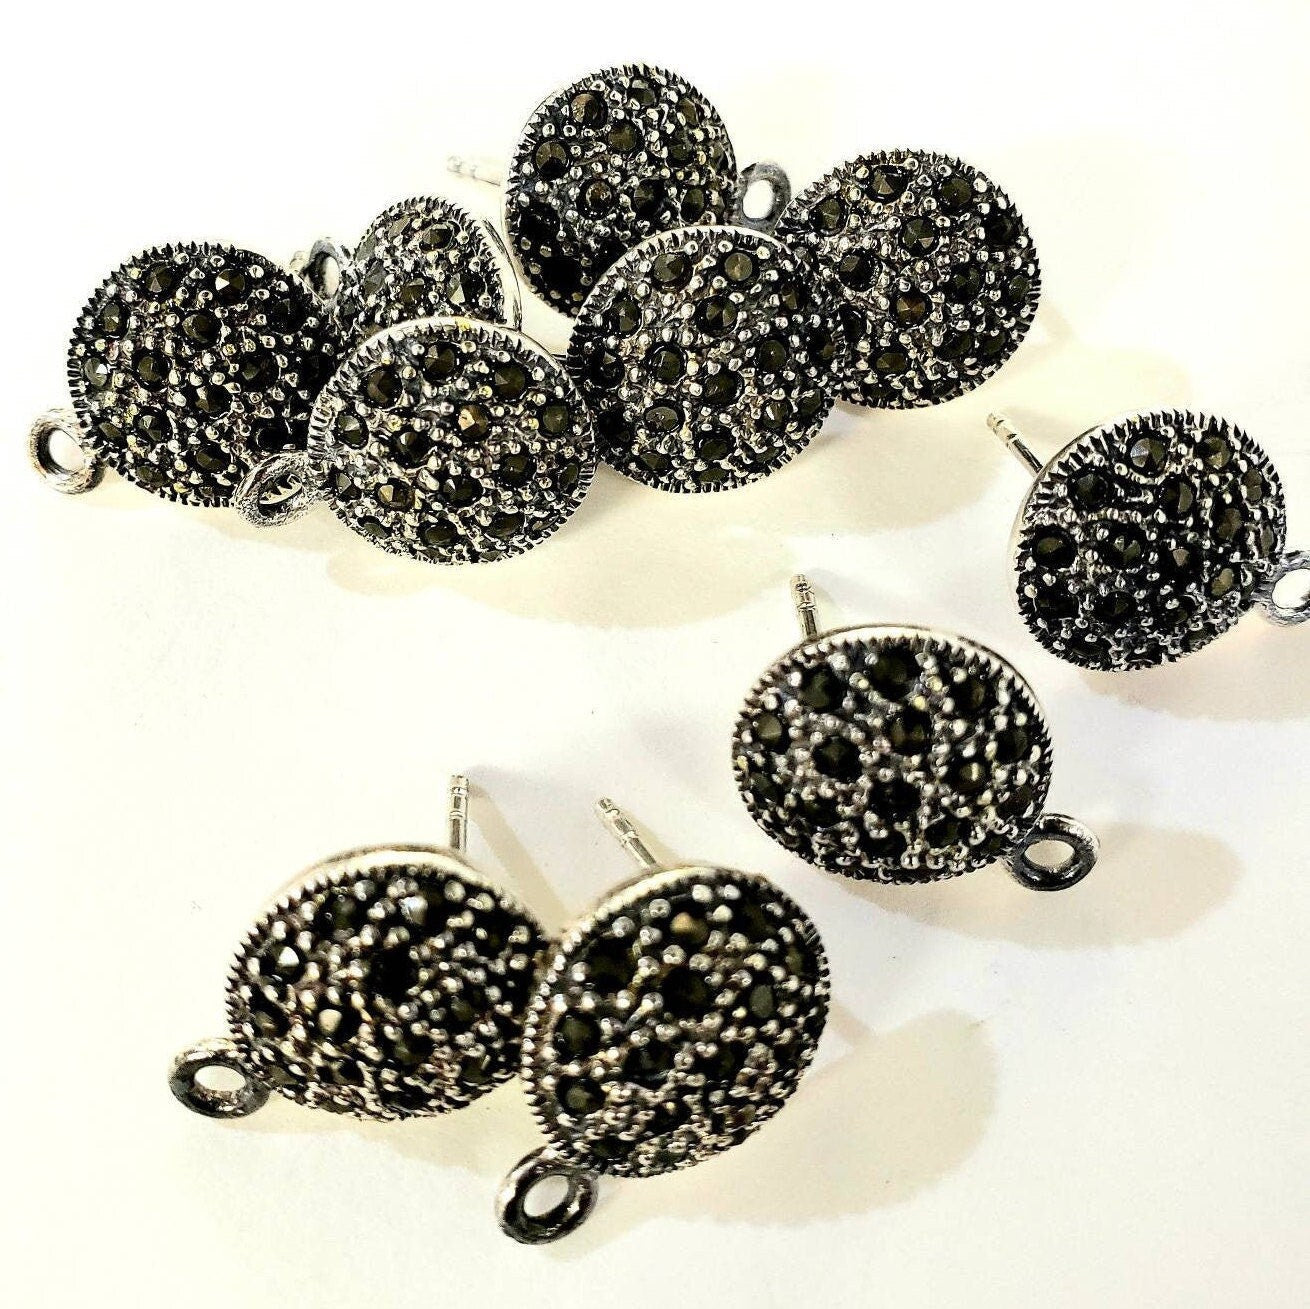 Marcasite 925 sterling silver 12mm disc earrings post with butterfly clutch, vintage, earrings making findings 1 pair, 2 pieces.